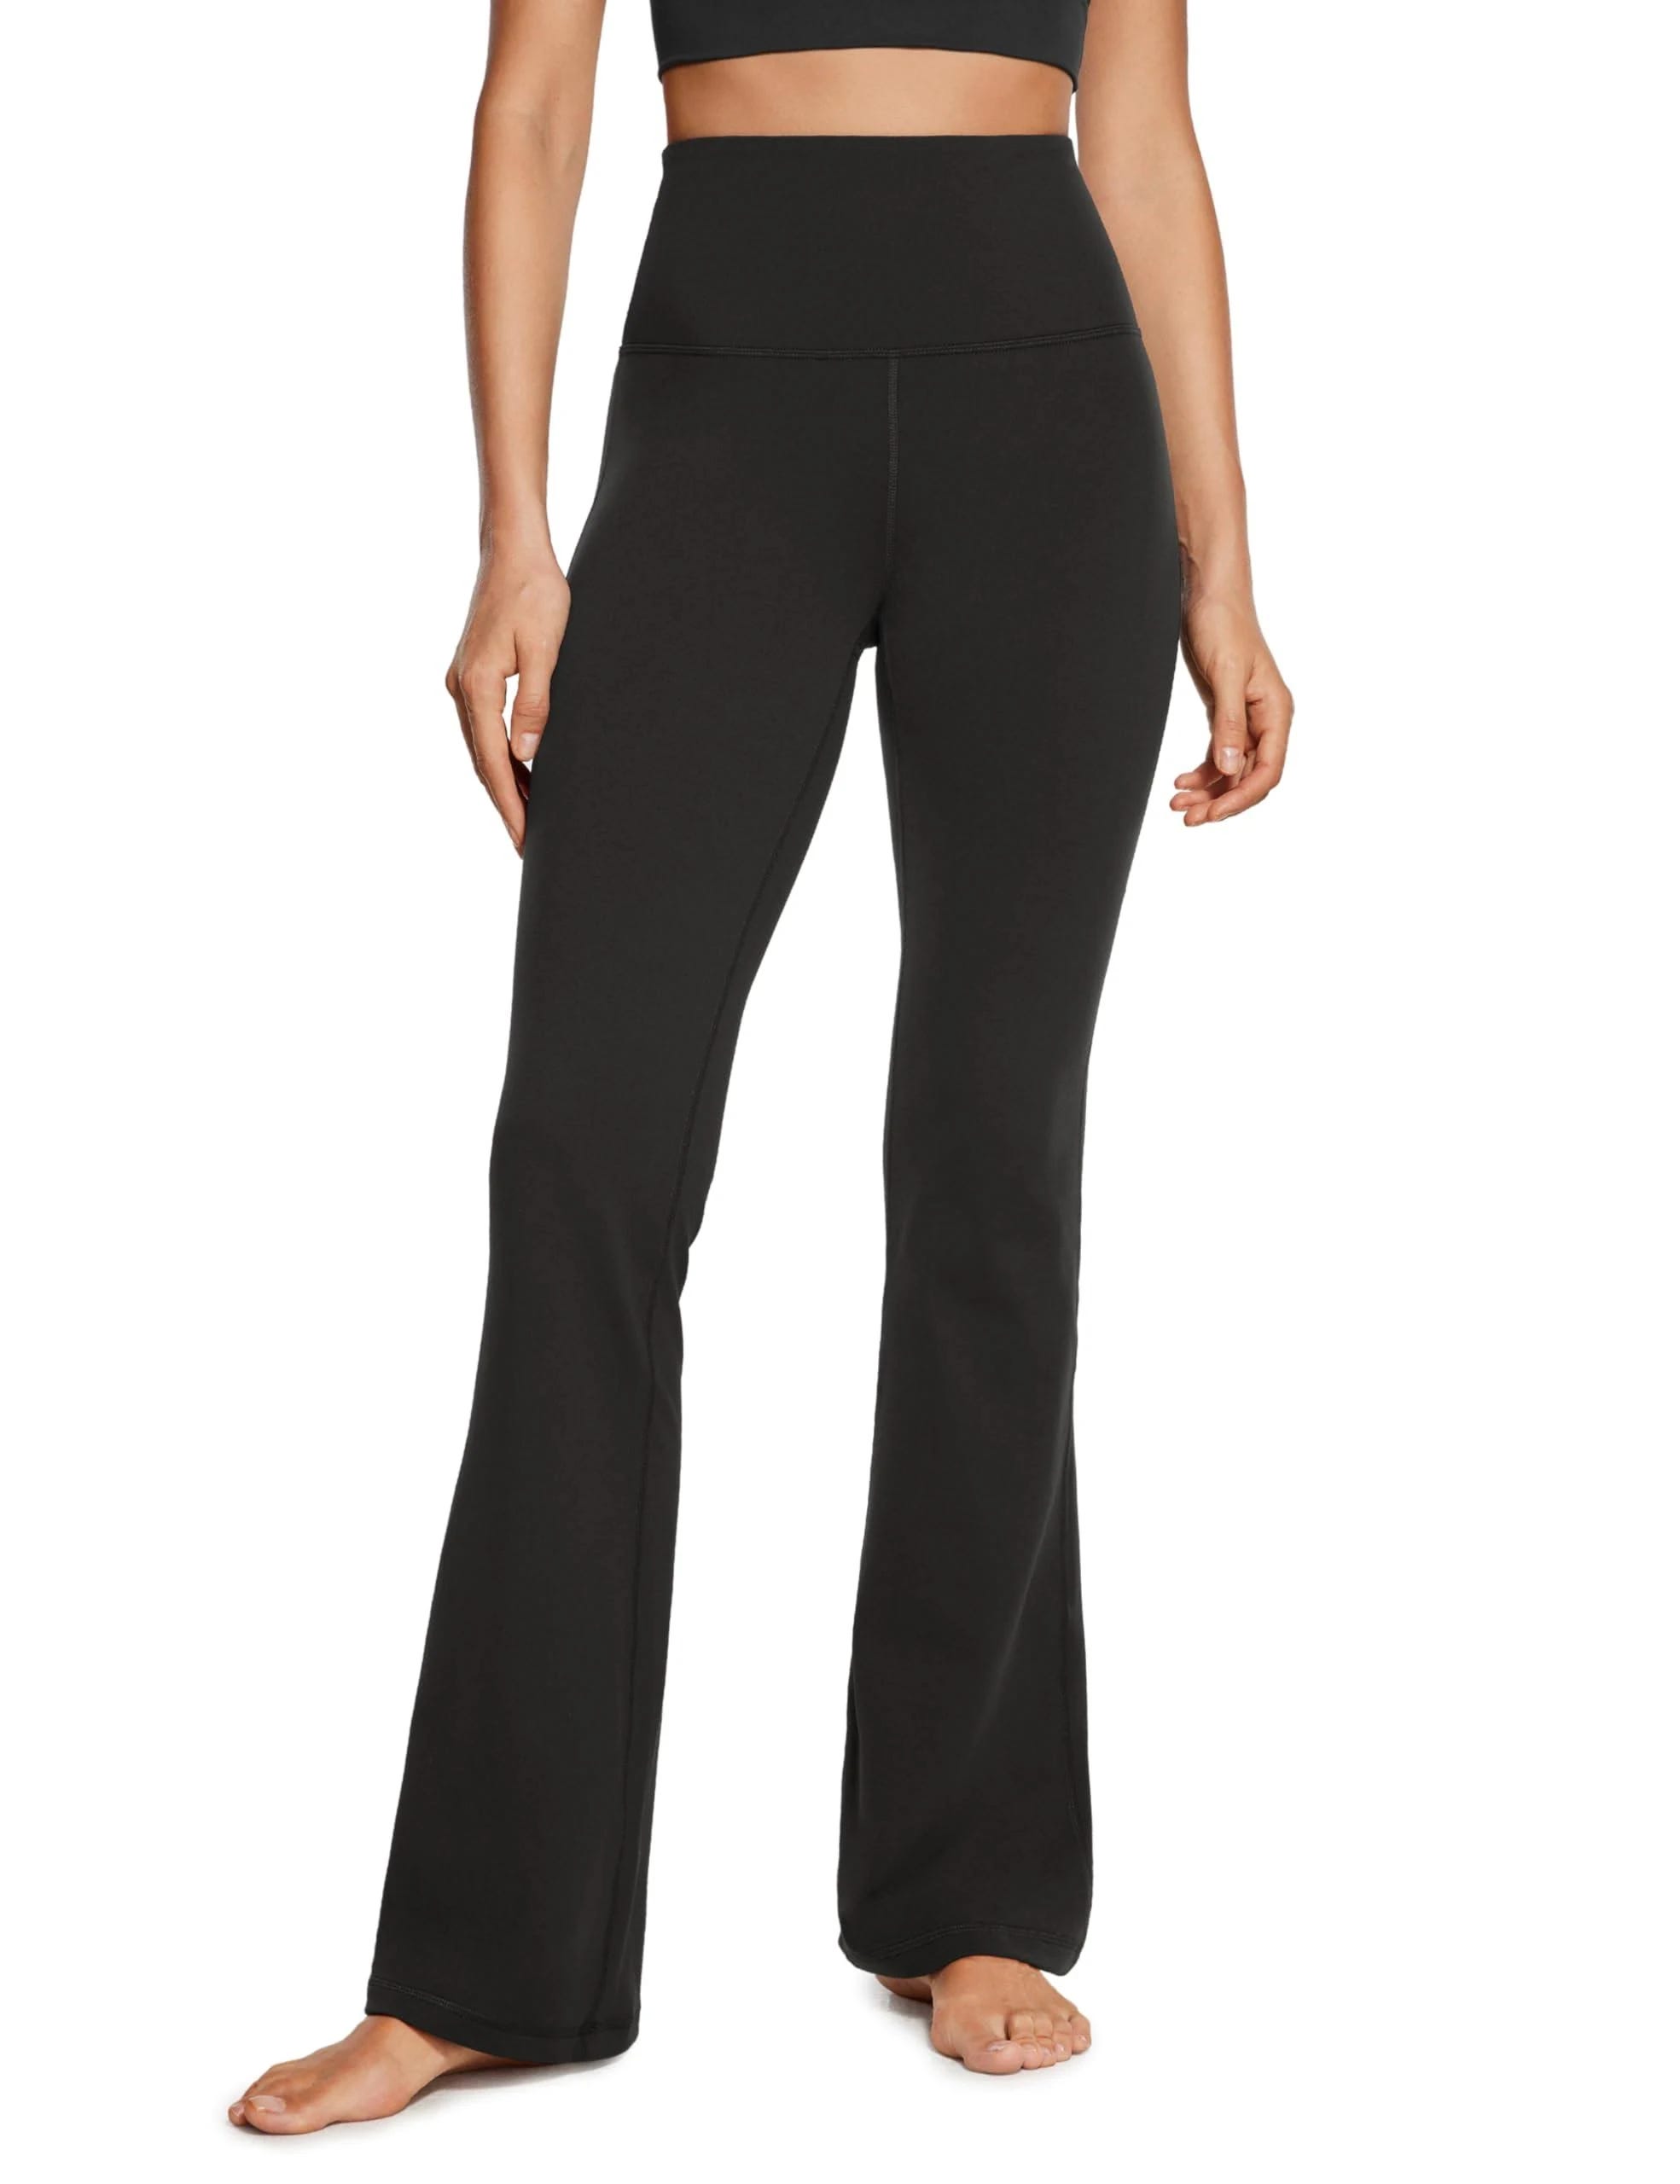 Comfortable, Stretchable Yoga Pants for Daily Wear | Image